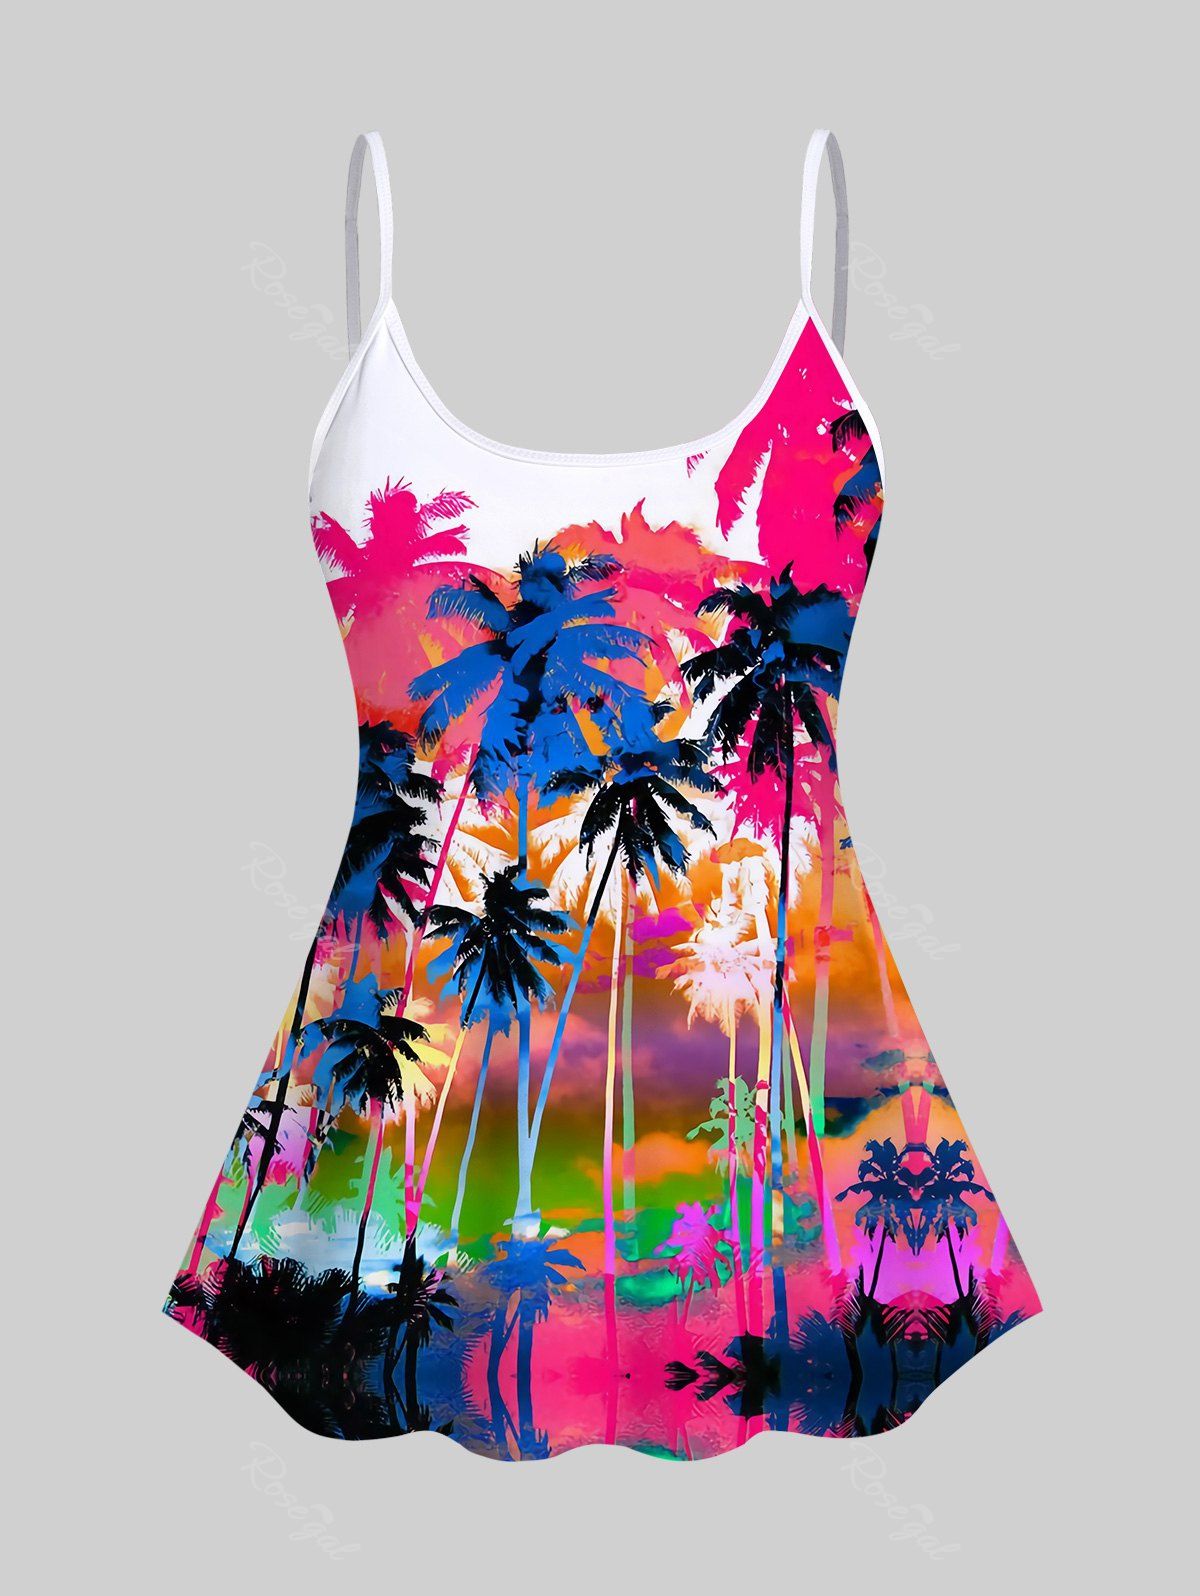 Discount 3D Colorful Coconut Tree Printed Spaghetti Strap Backless Tankini Top (Adjustable Shoulder Strap)  